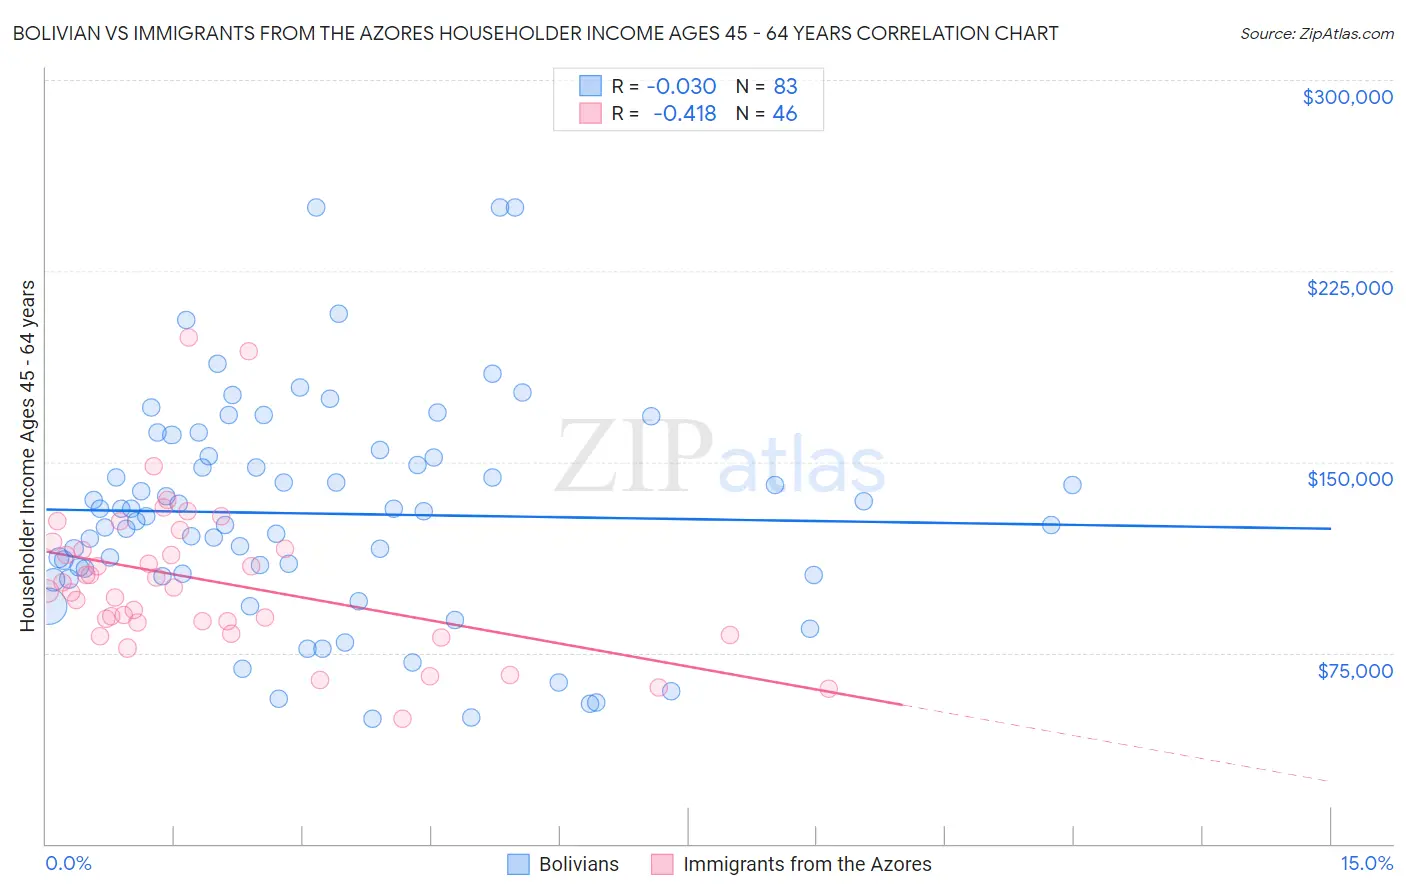 Bolivian vs Immigrants from the Azores Householder Income Ages 45 - 64 years